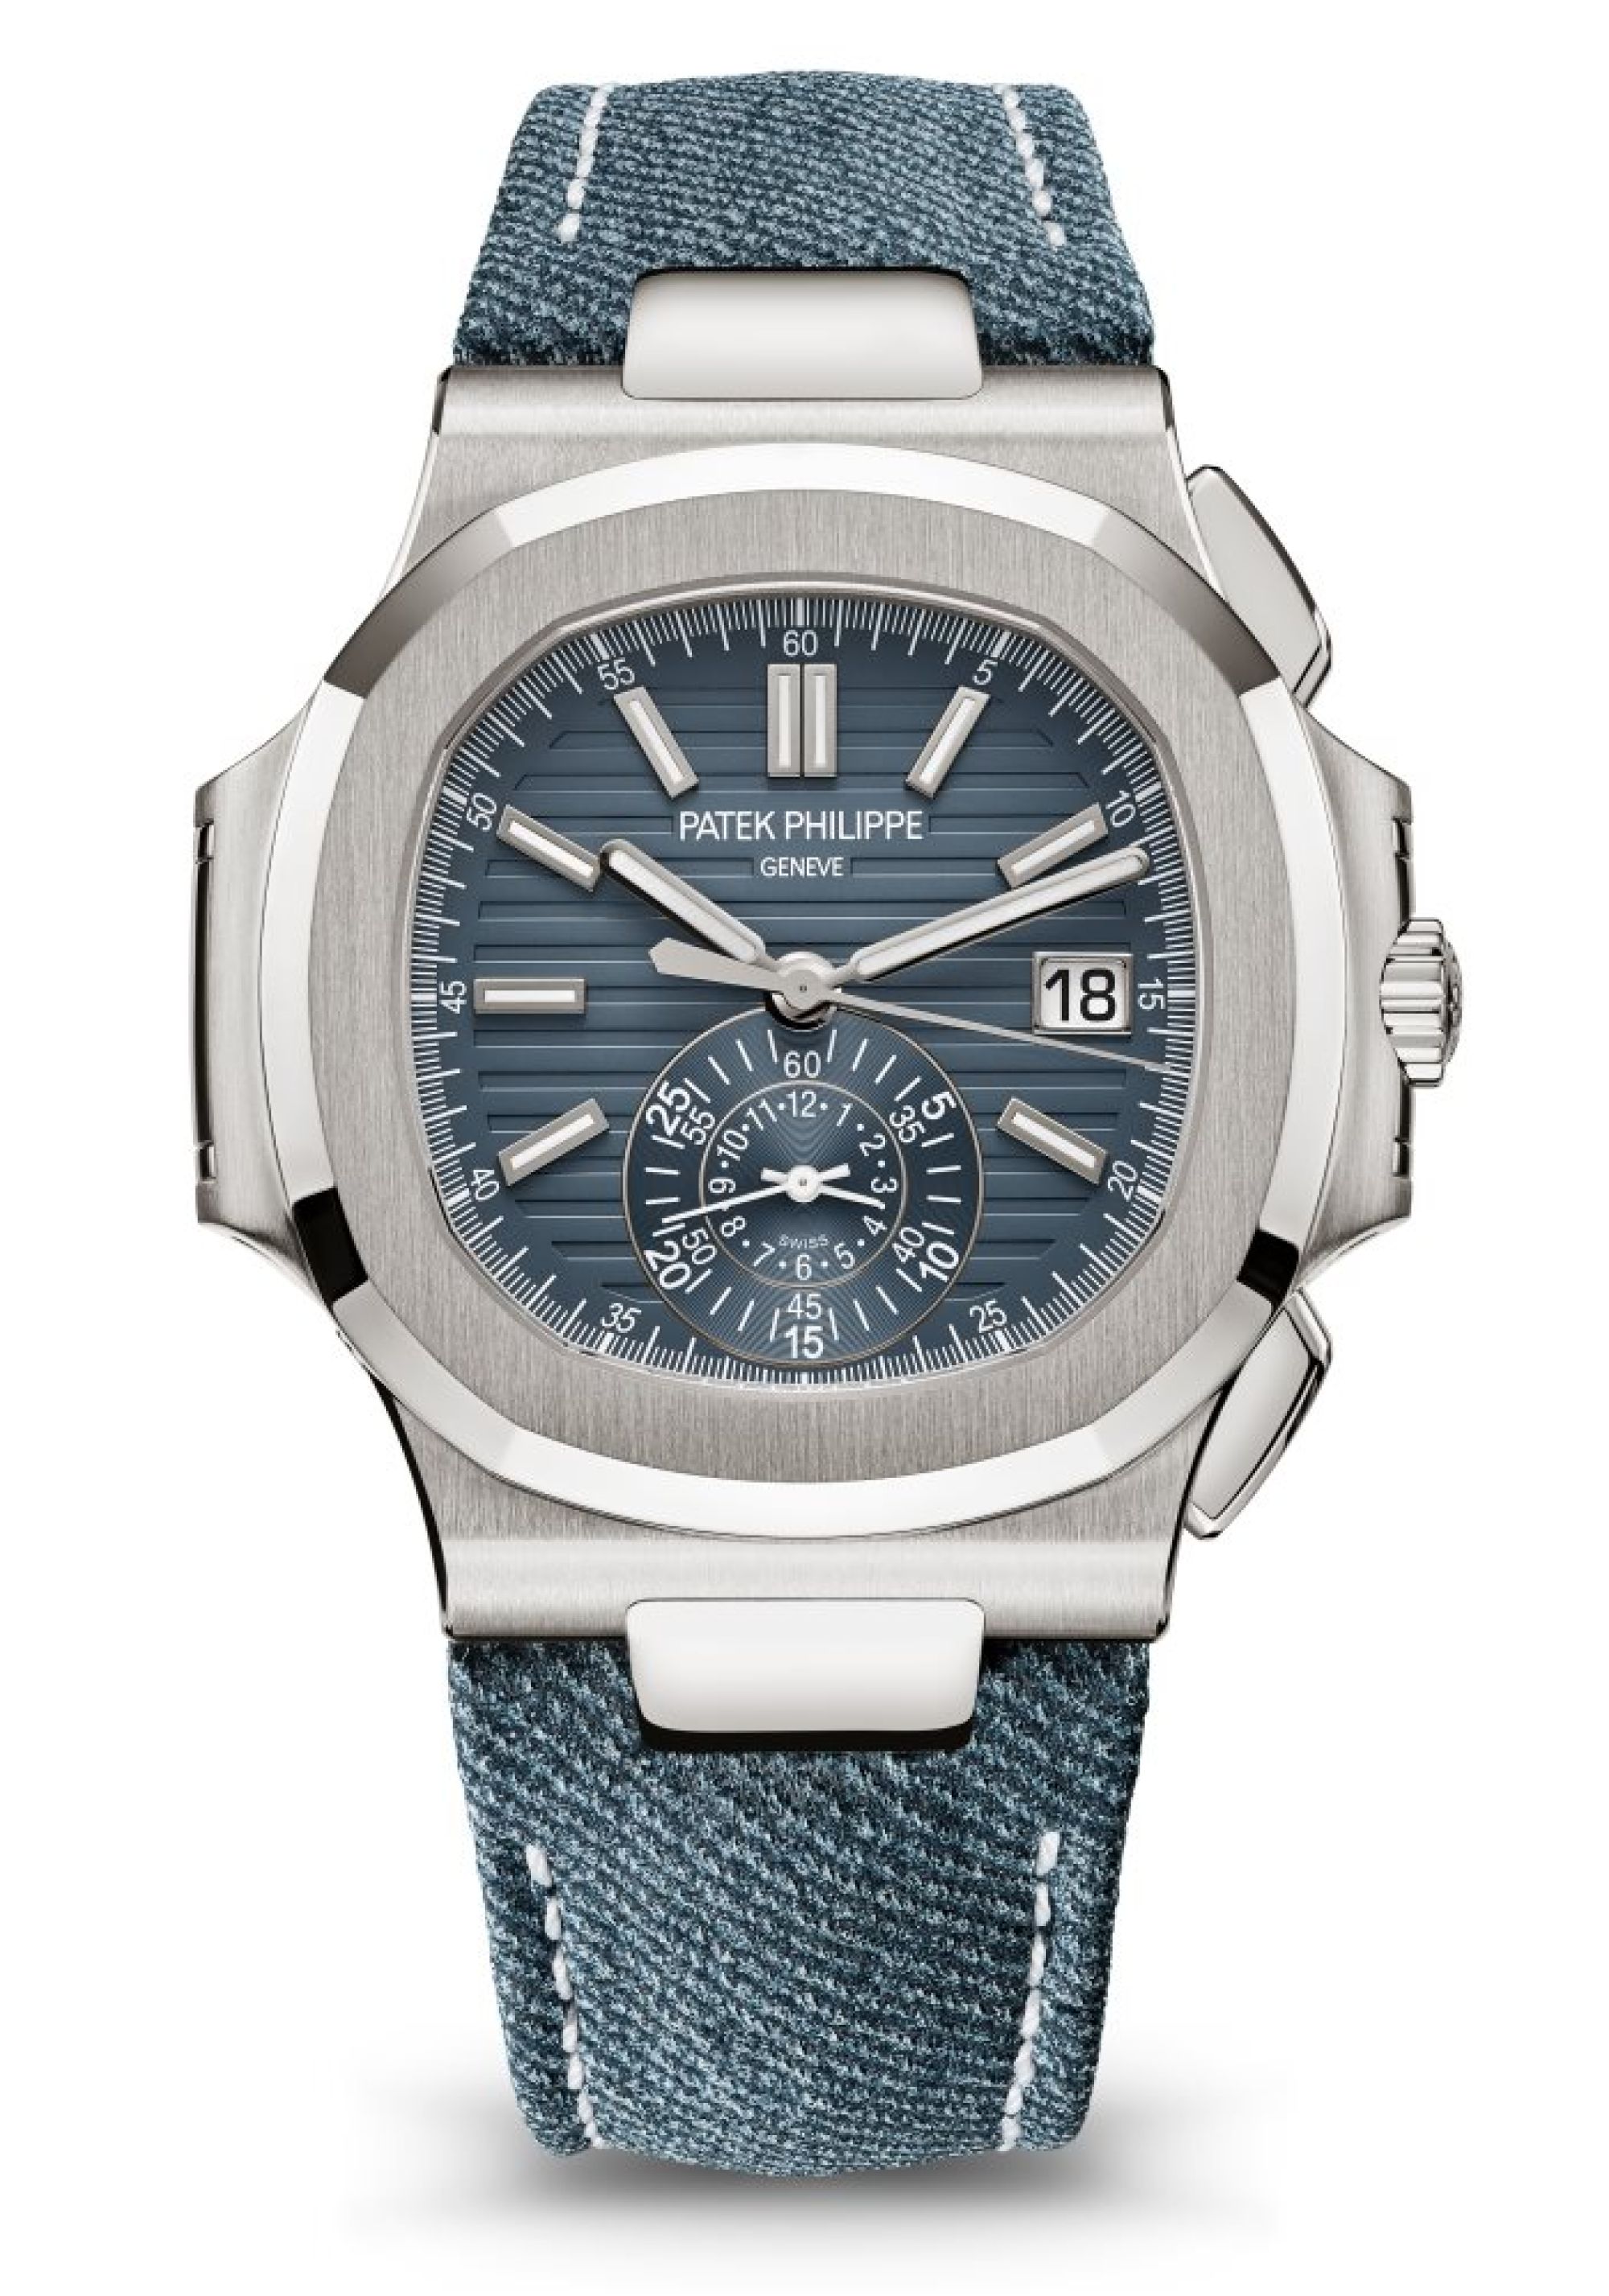 Patek Philippe Flyback-Chronograph. Face